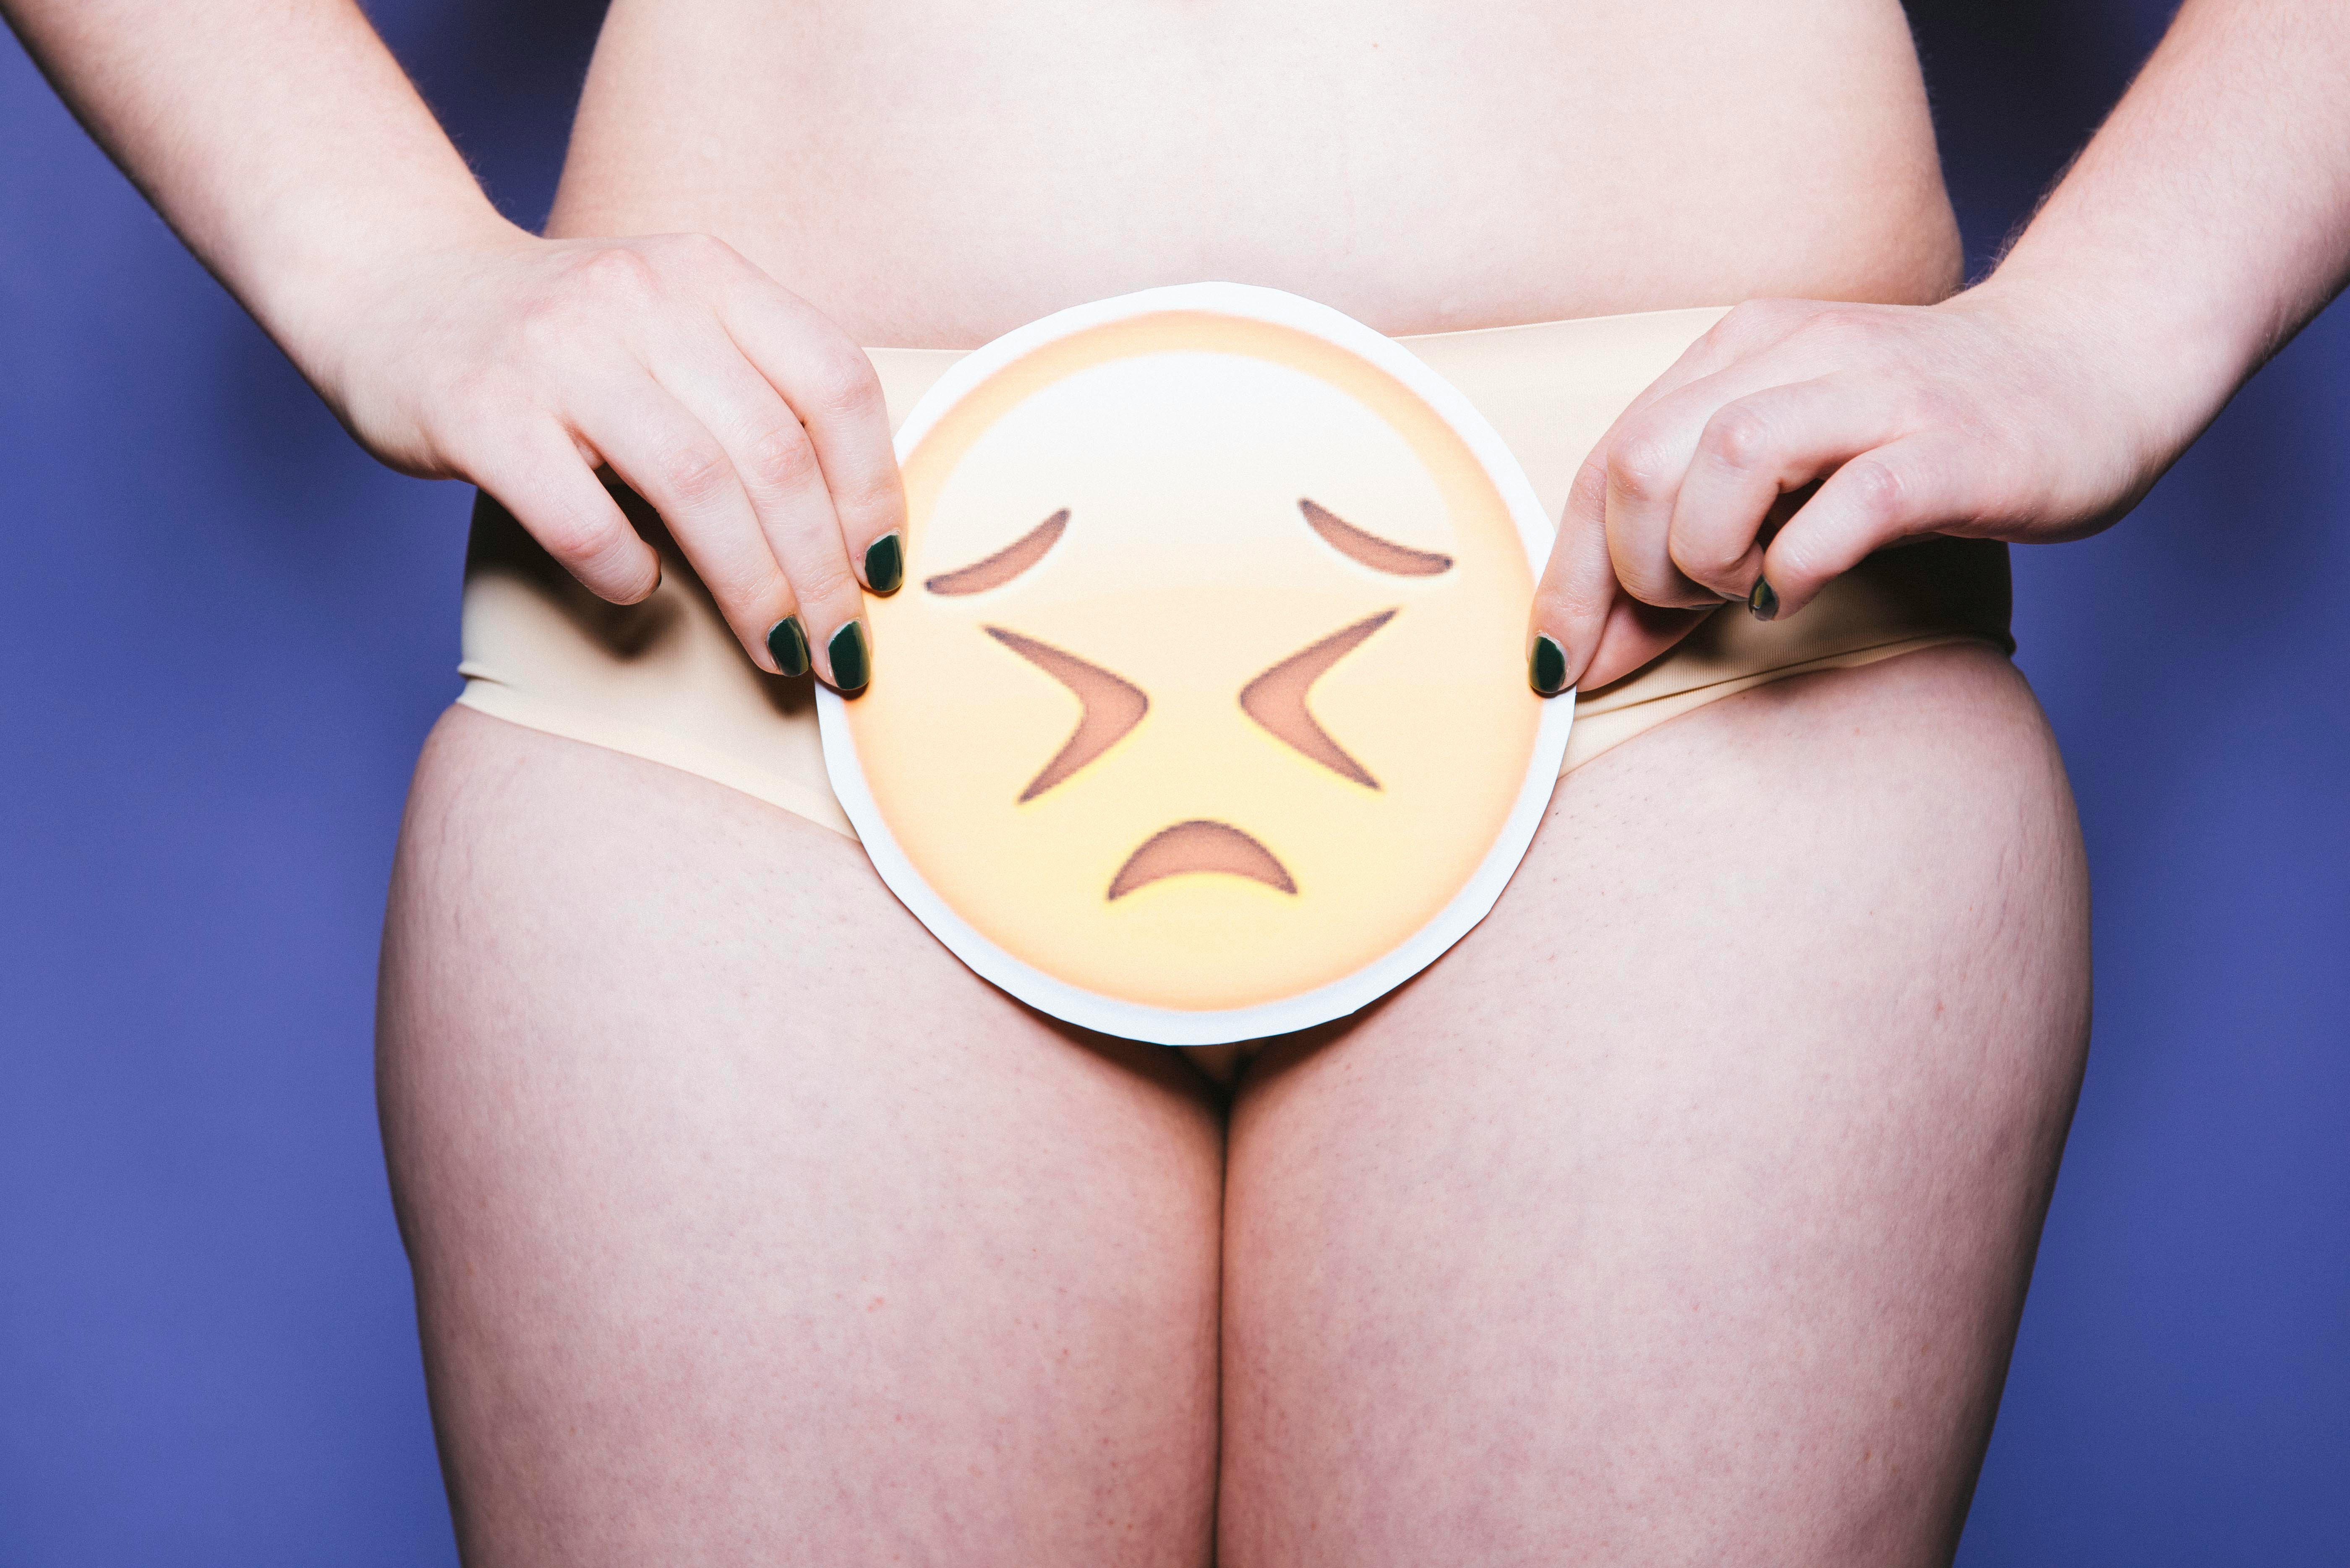 Why do we wear undergarments? – Ugees